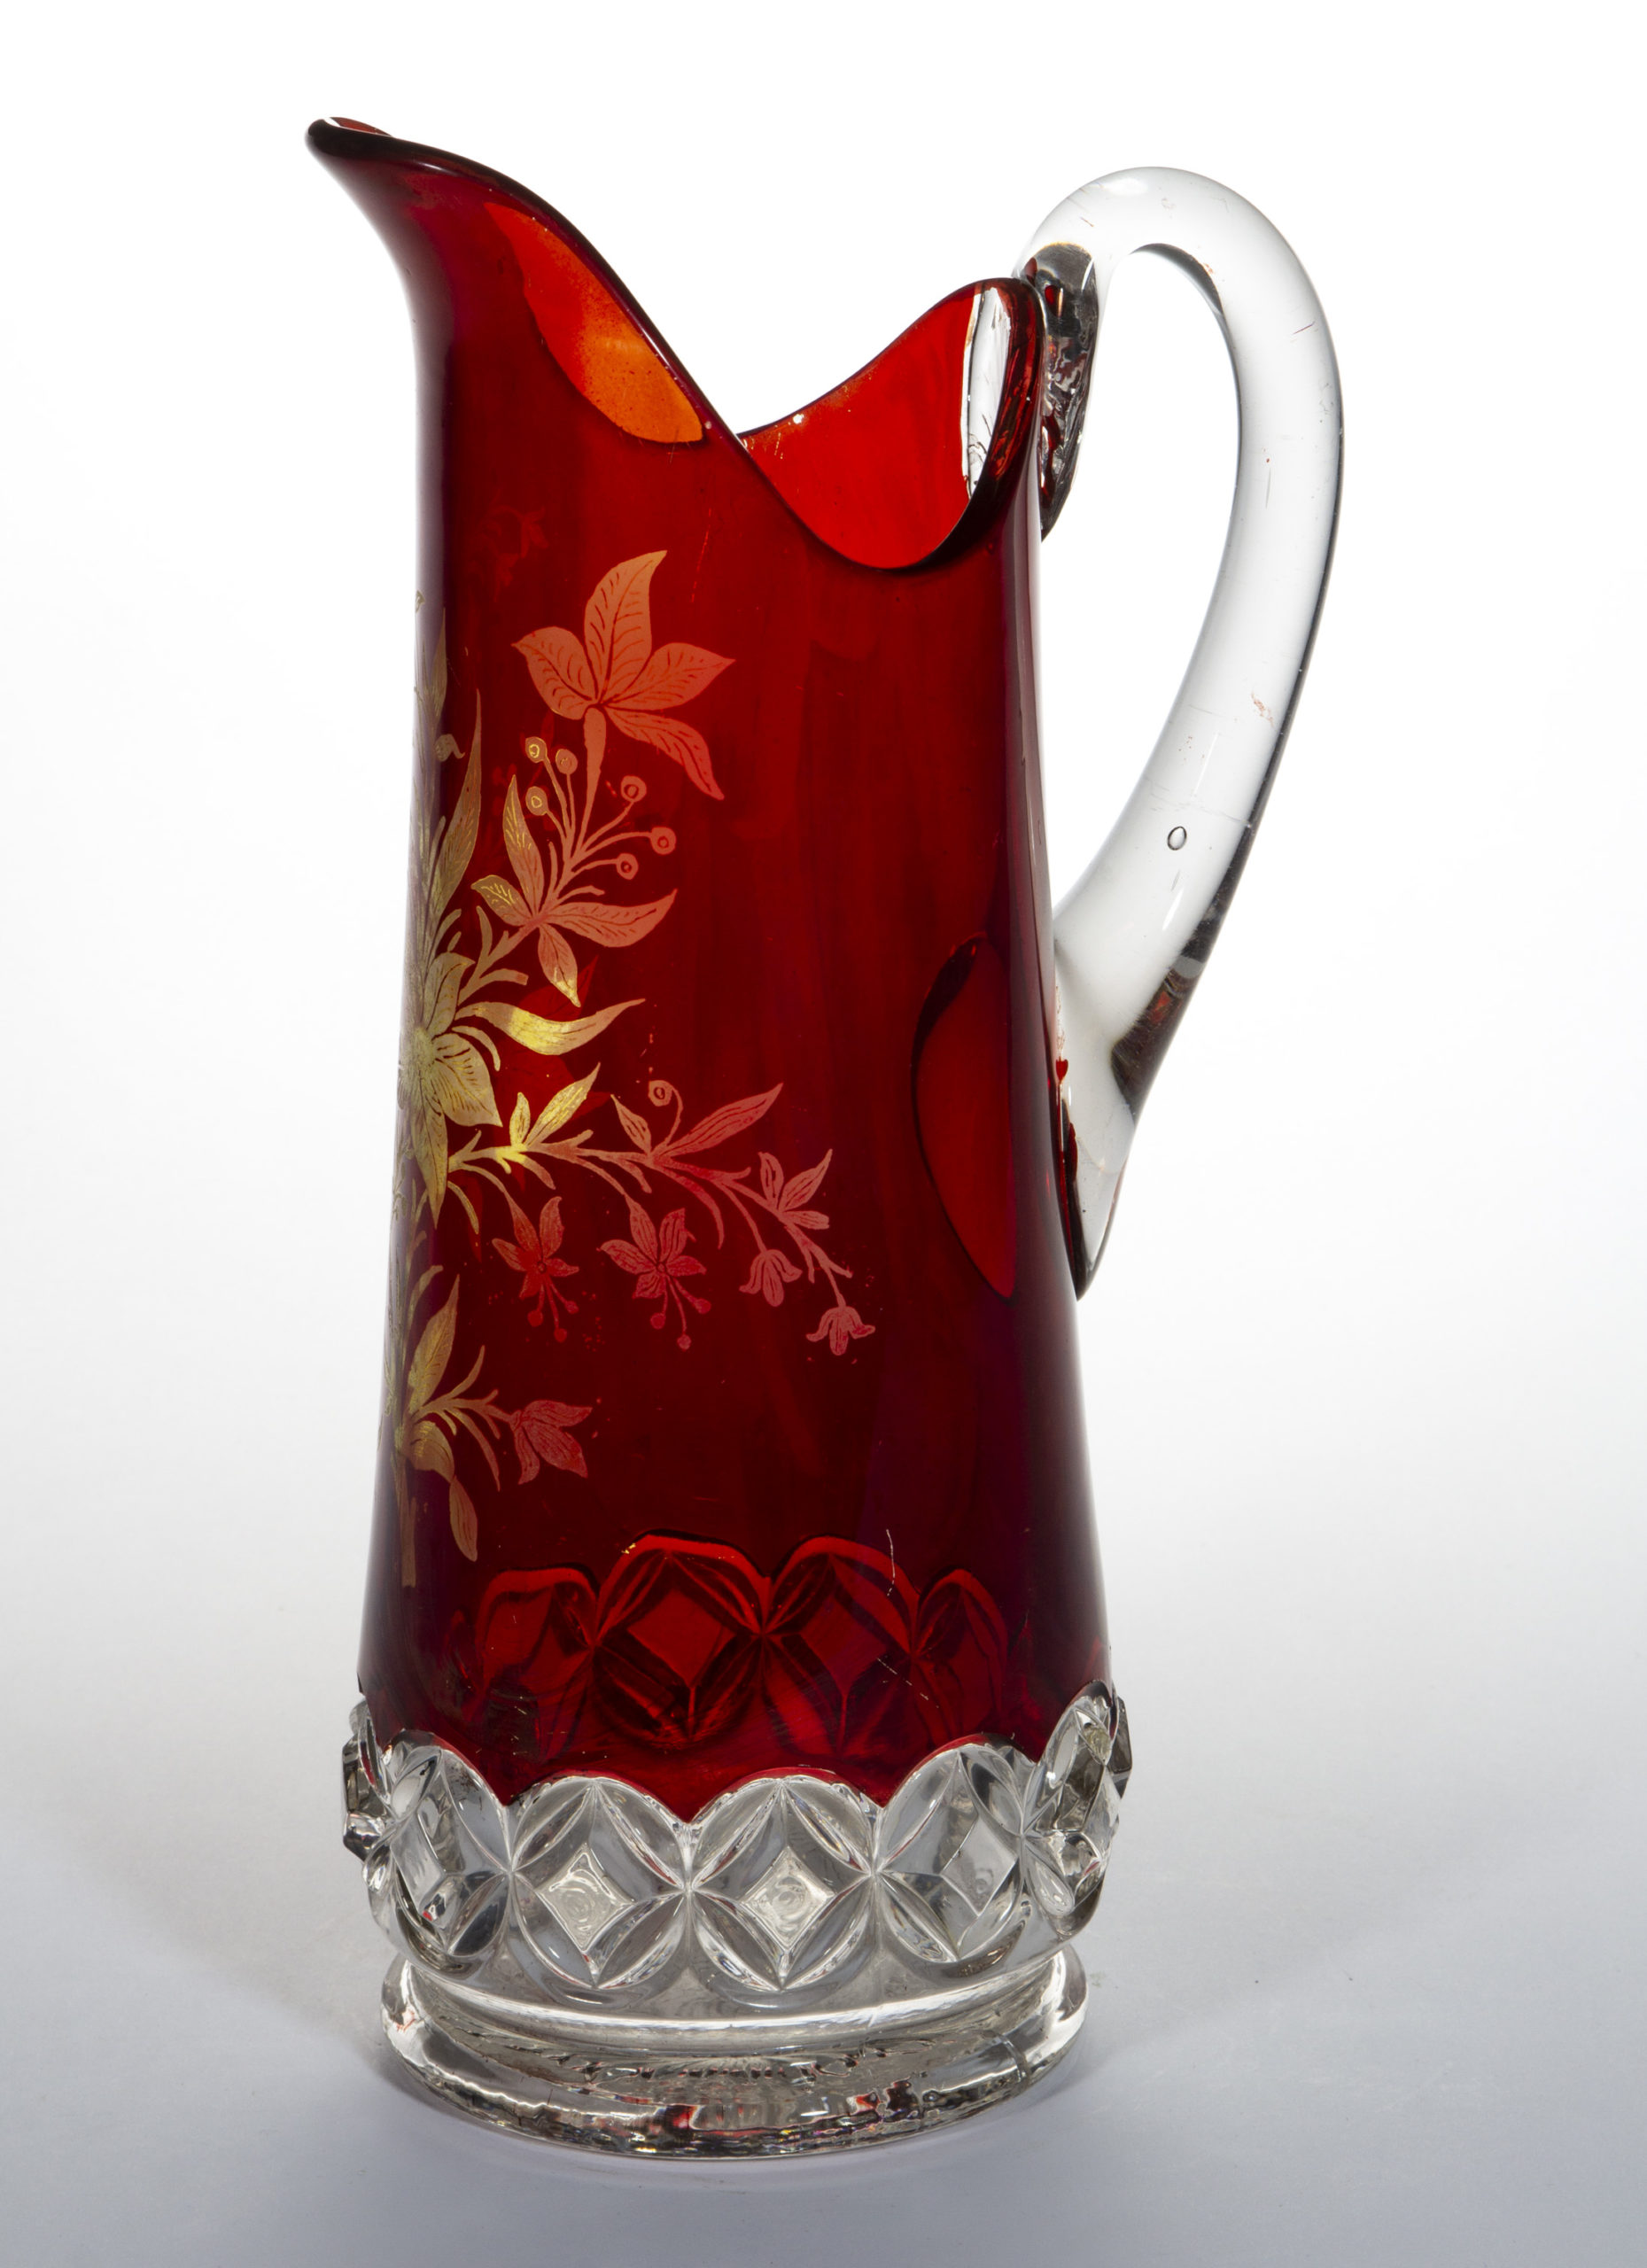 HERO / RUBY ROSETTE – RUBY-STAINED WATER PITCHER,